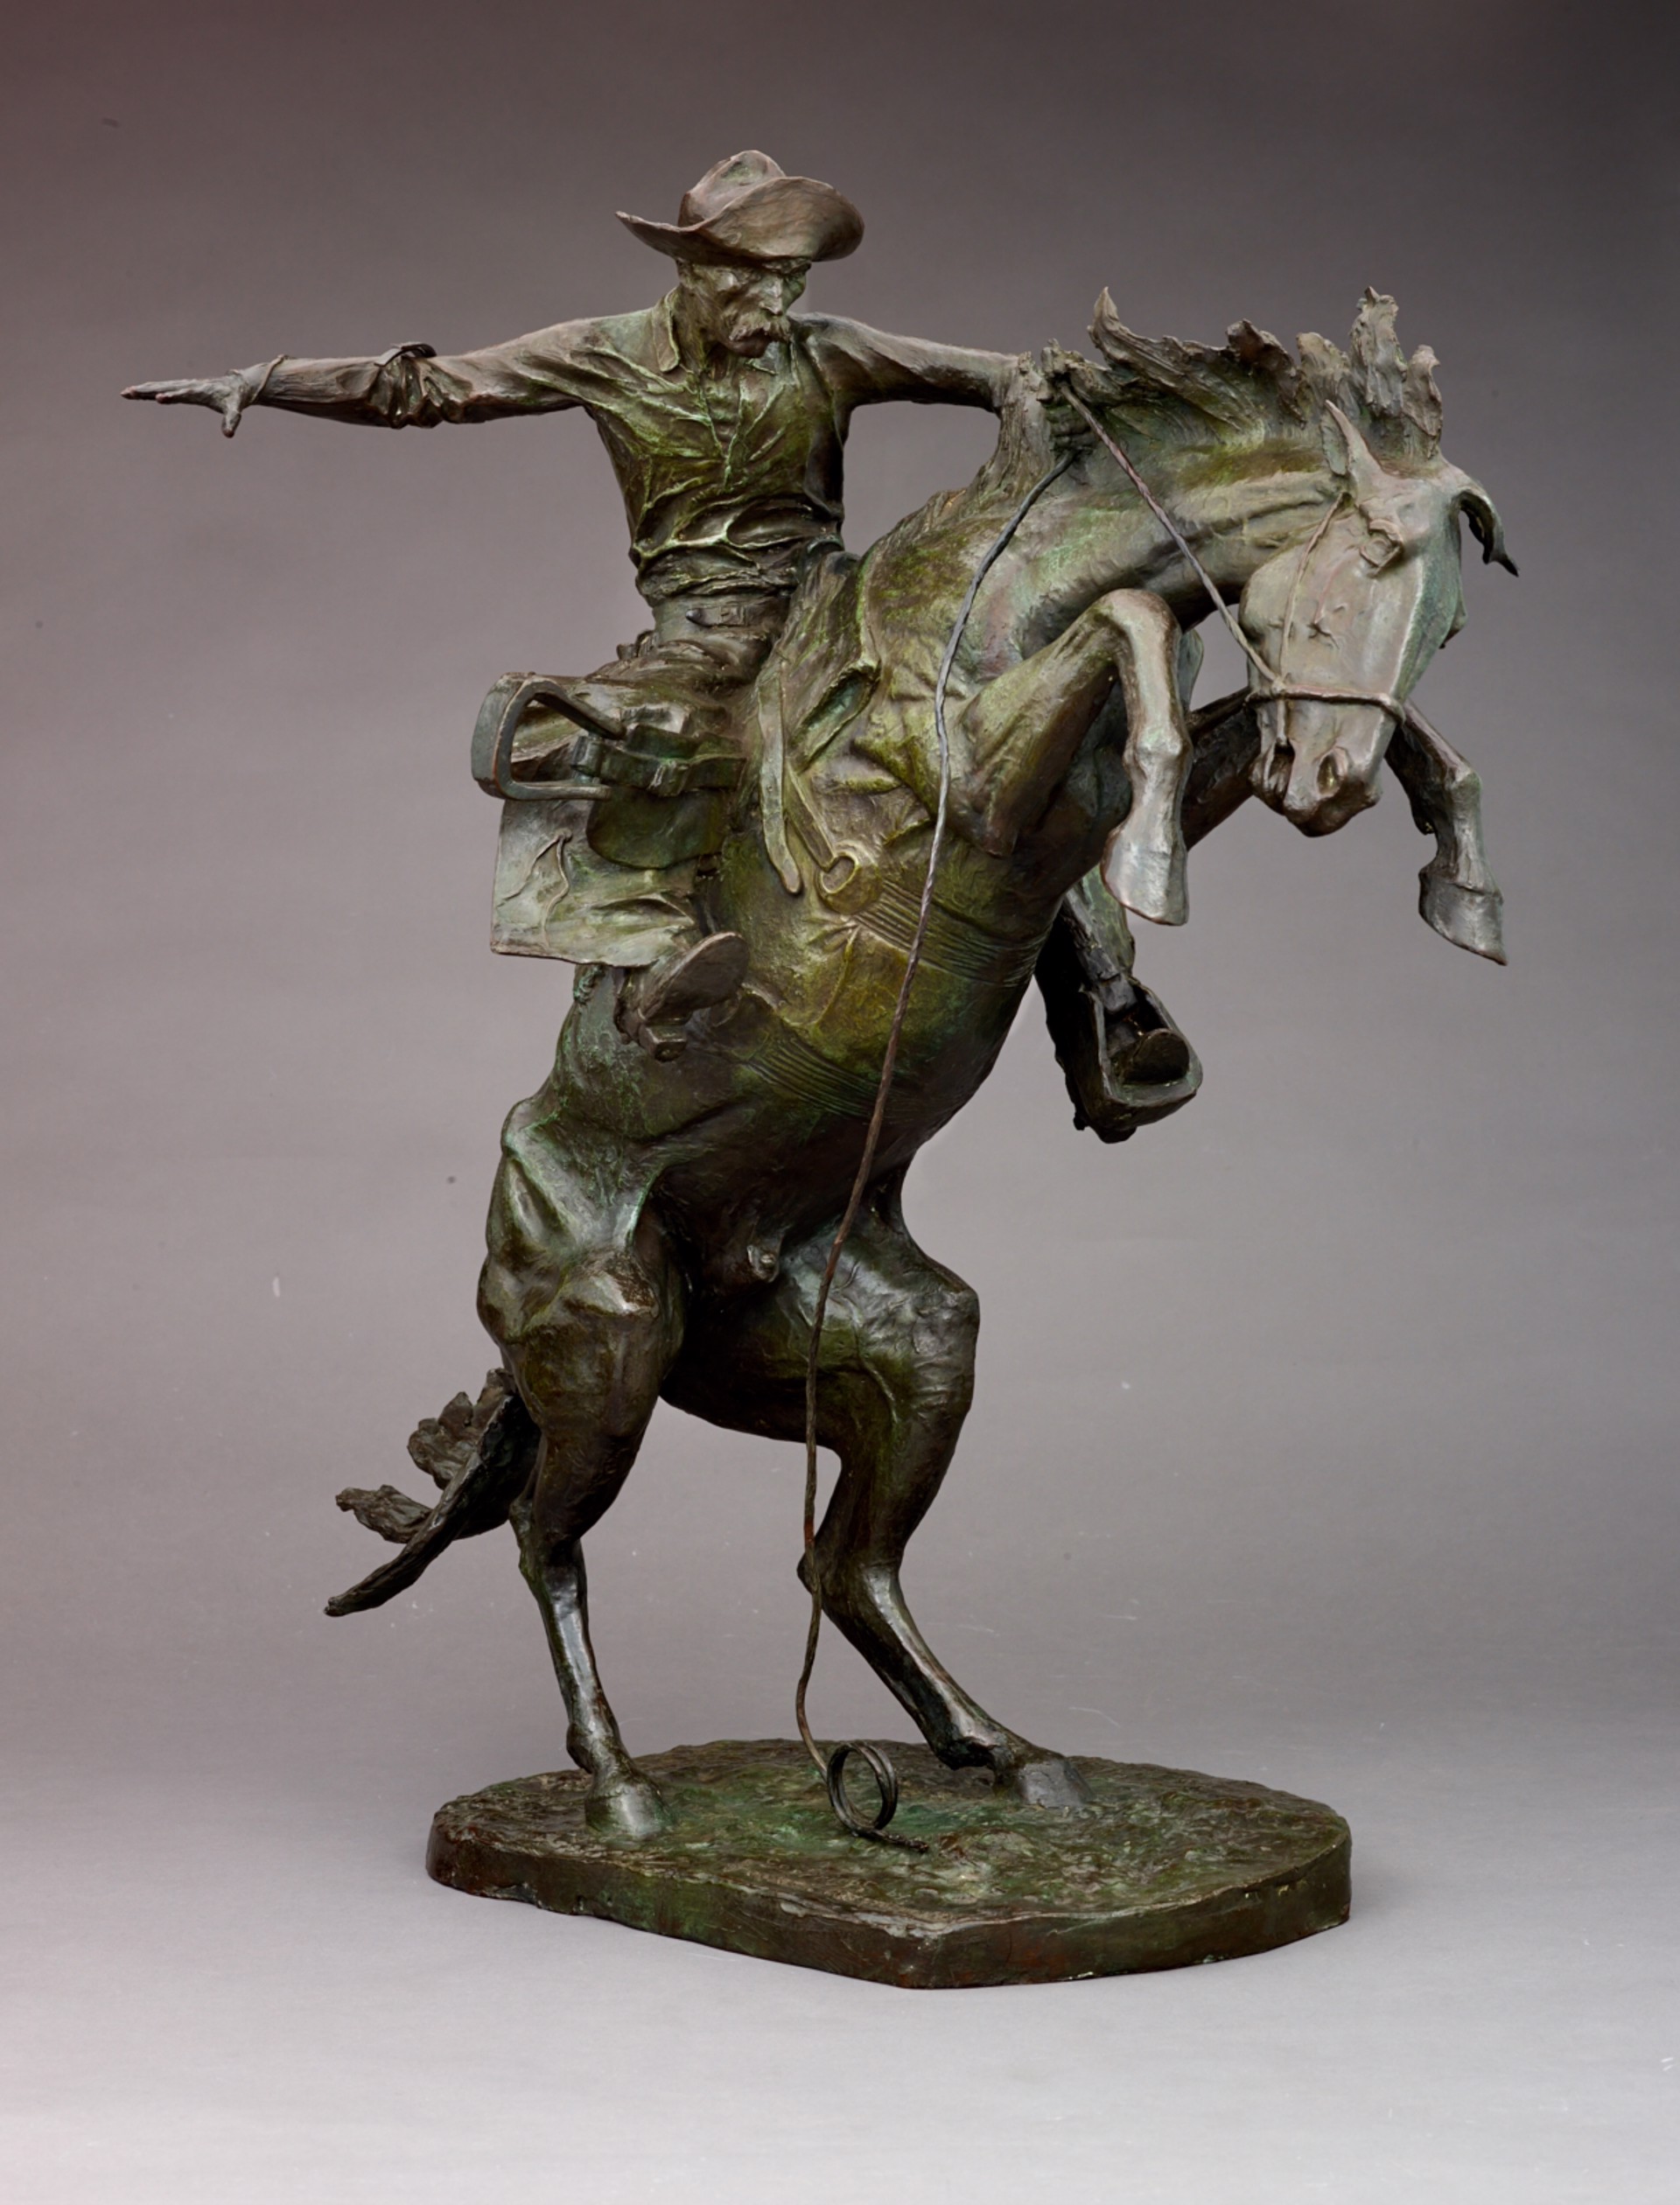 The Broncho Buster [No. 11 - Large], modeled 1909 by Frederic Remington